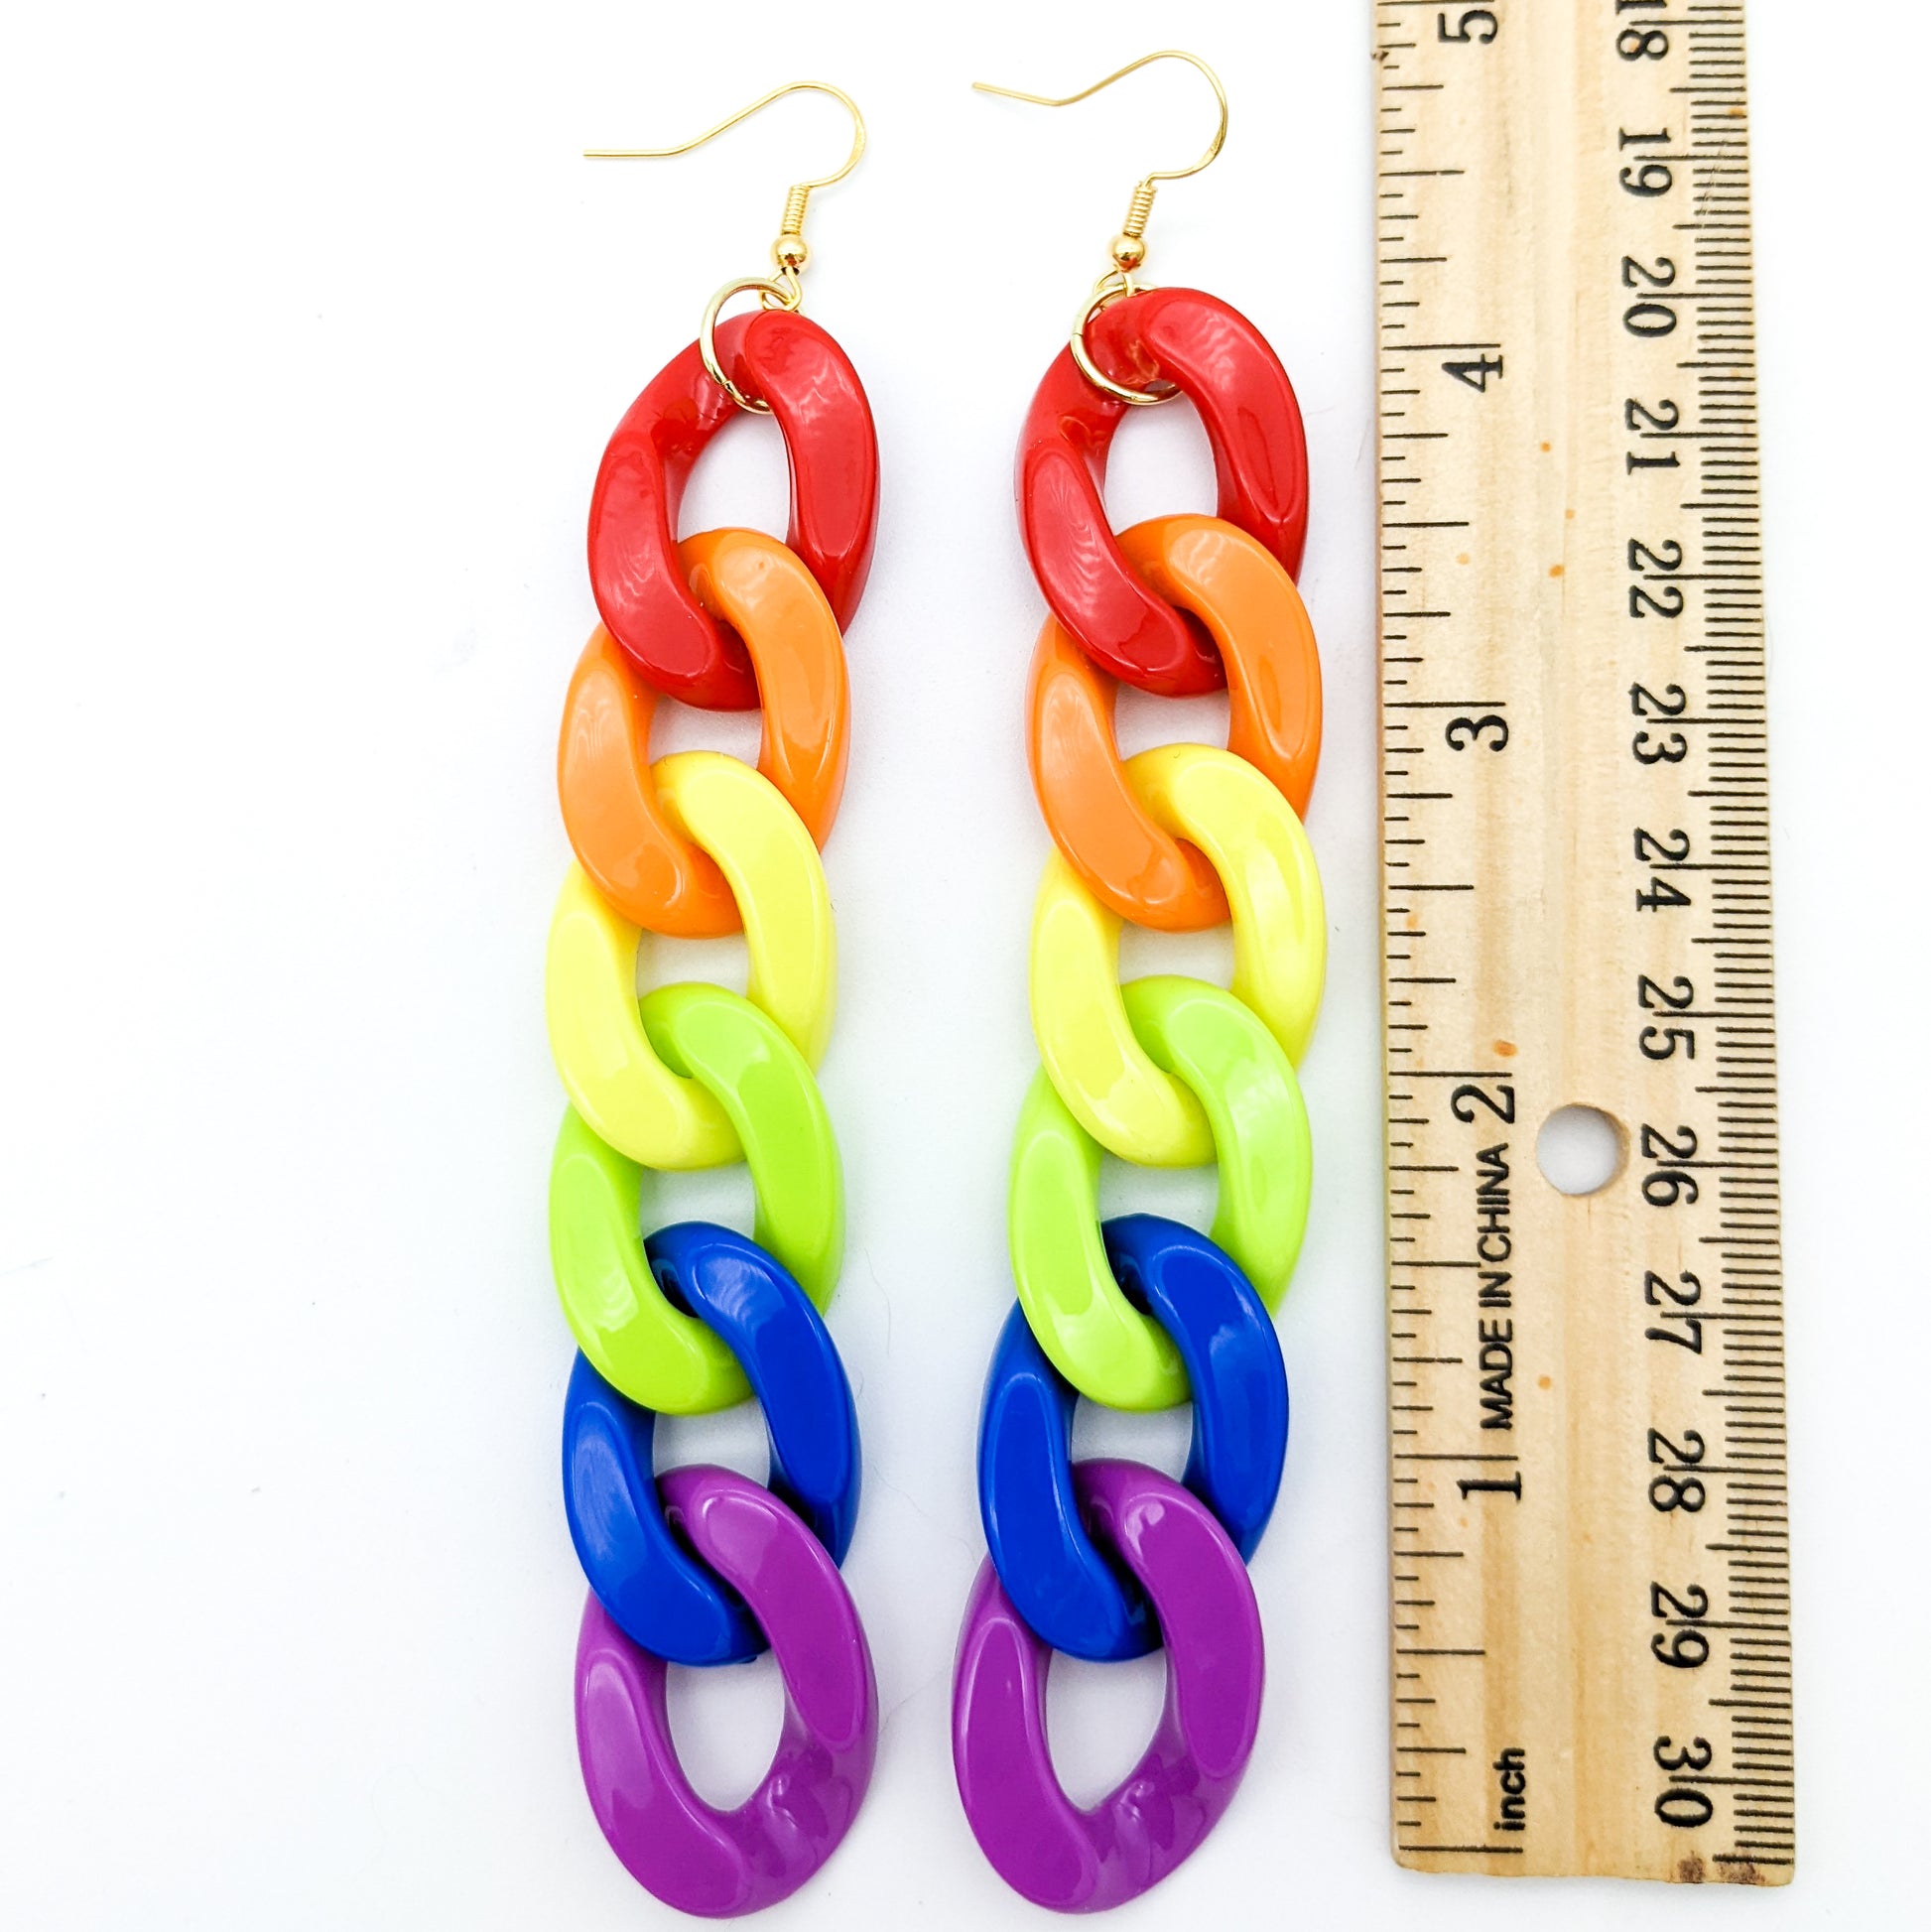 Rubber Ring Earrings with Plastic Chain Link (Assorted Colors) Orange